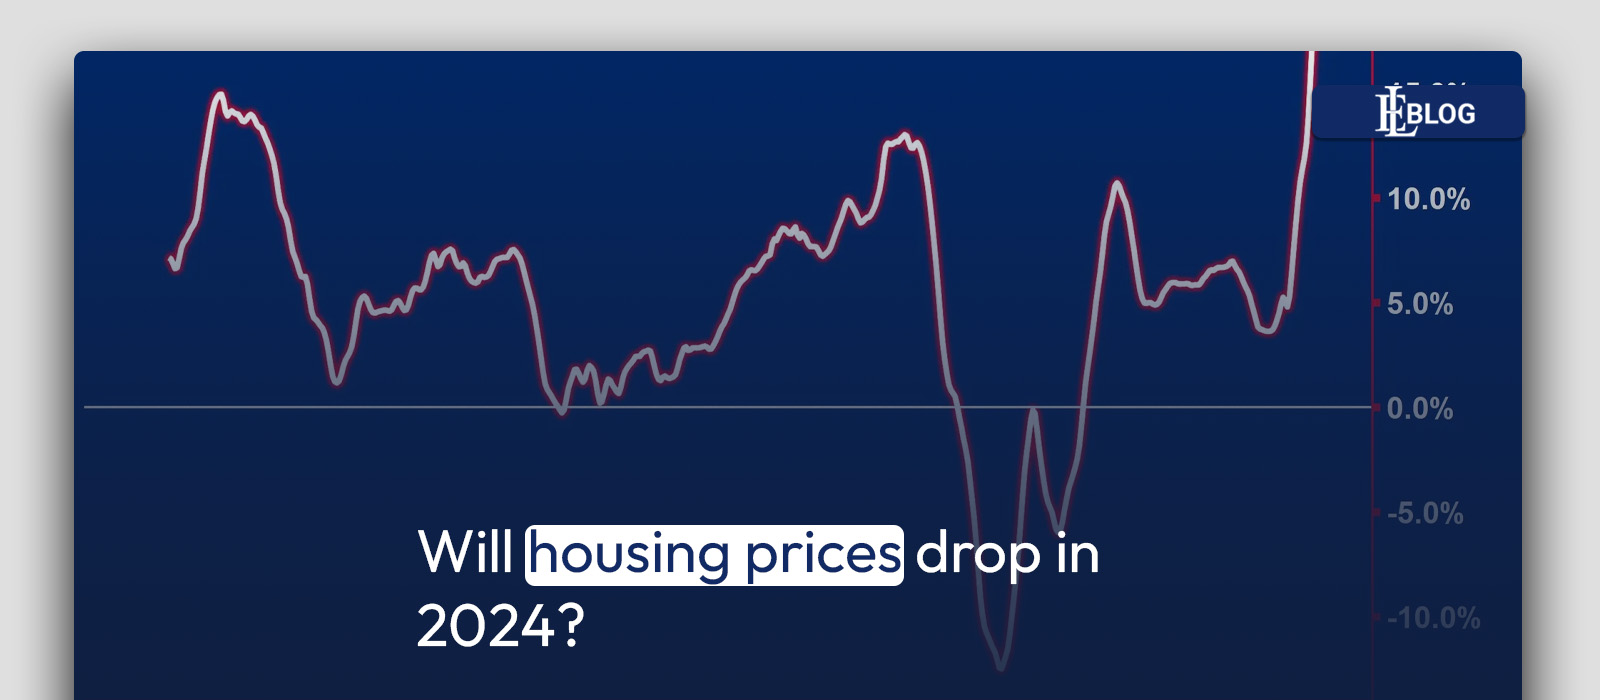 Will housing prices drop in 2024?